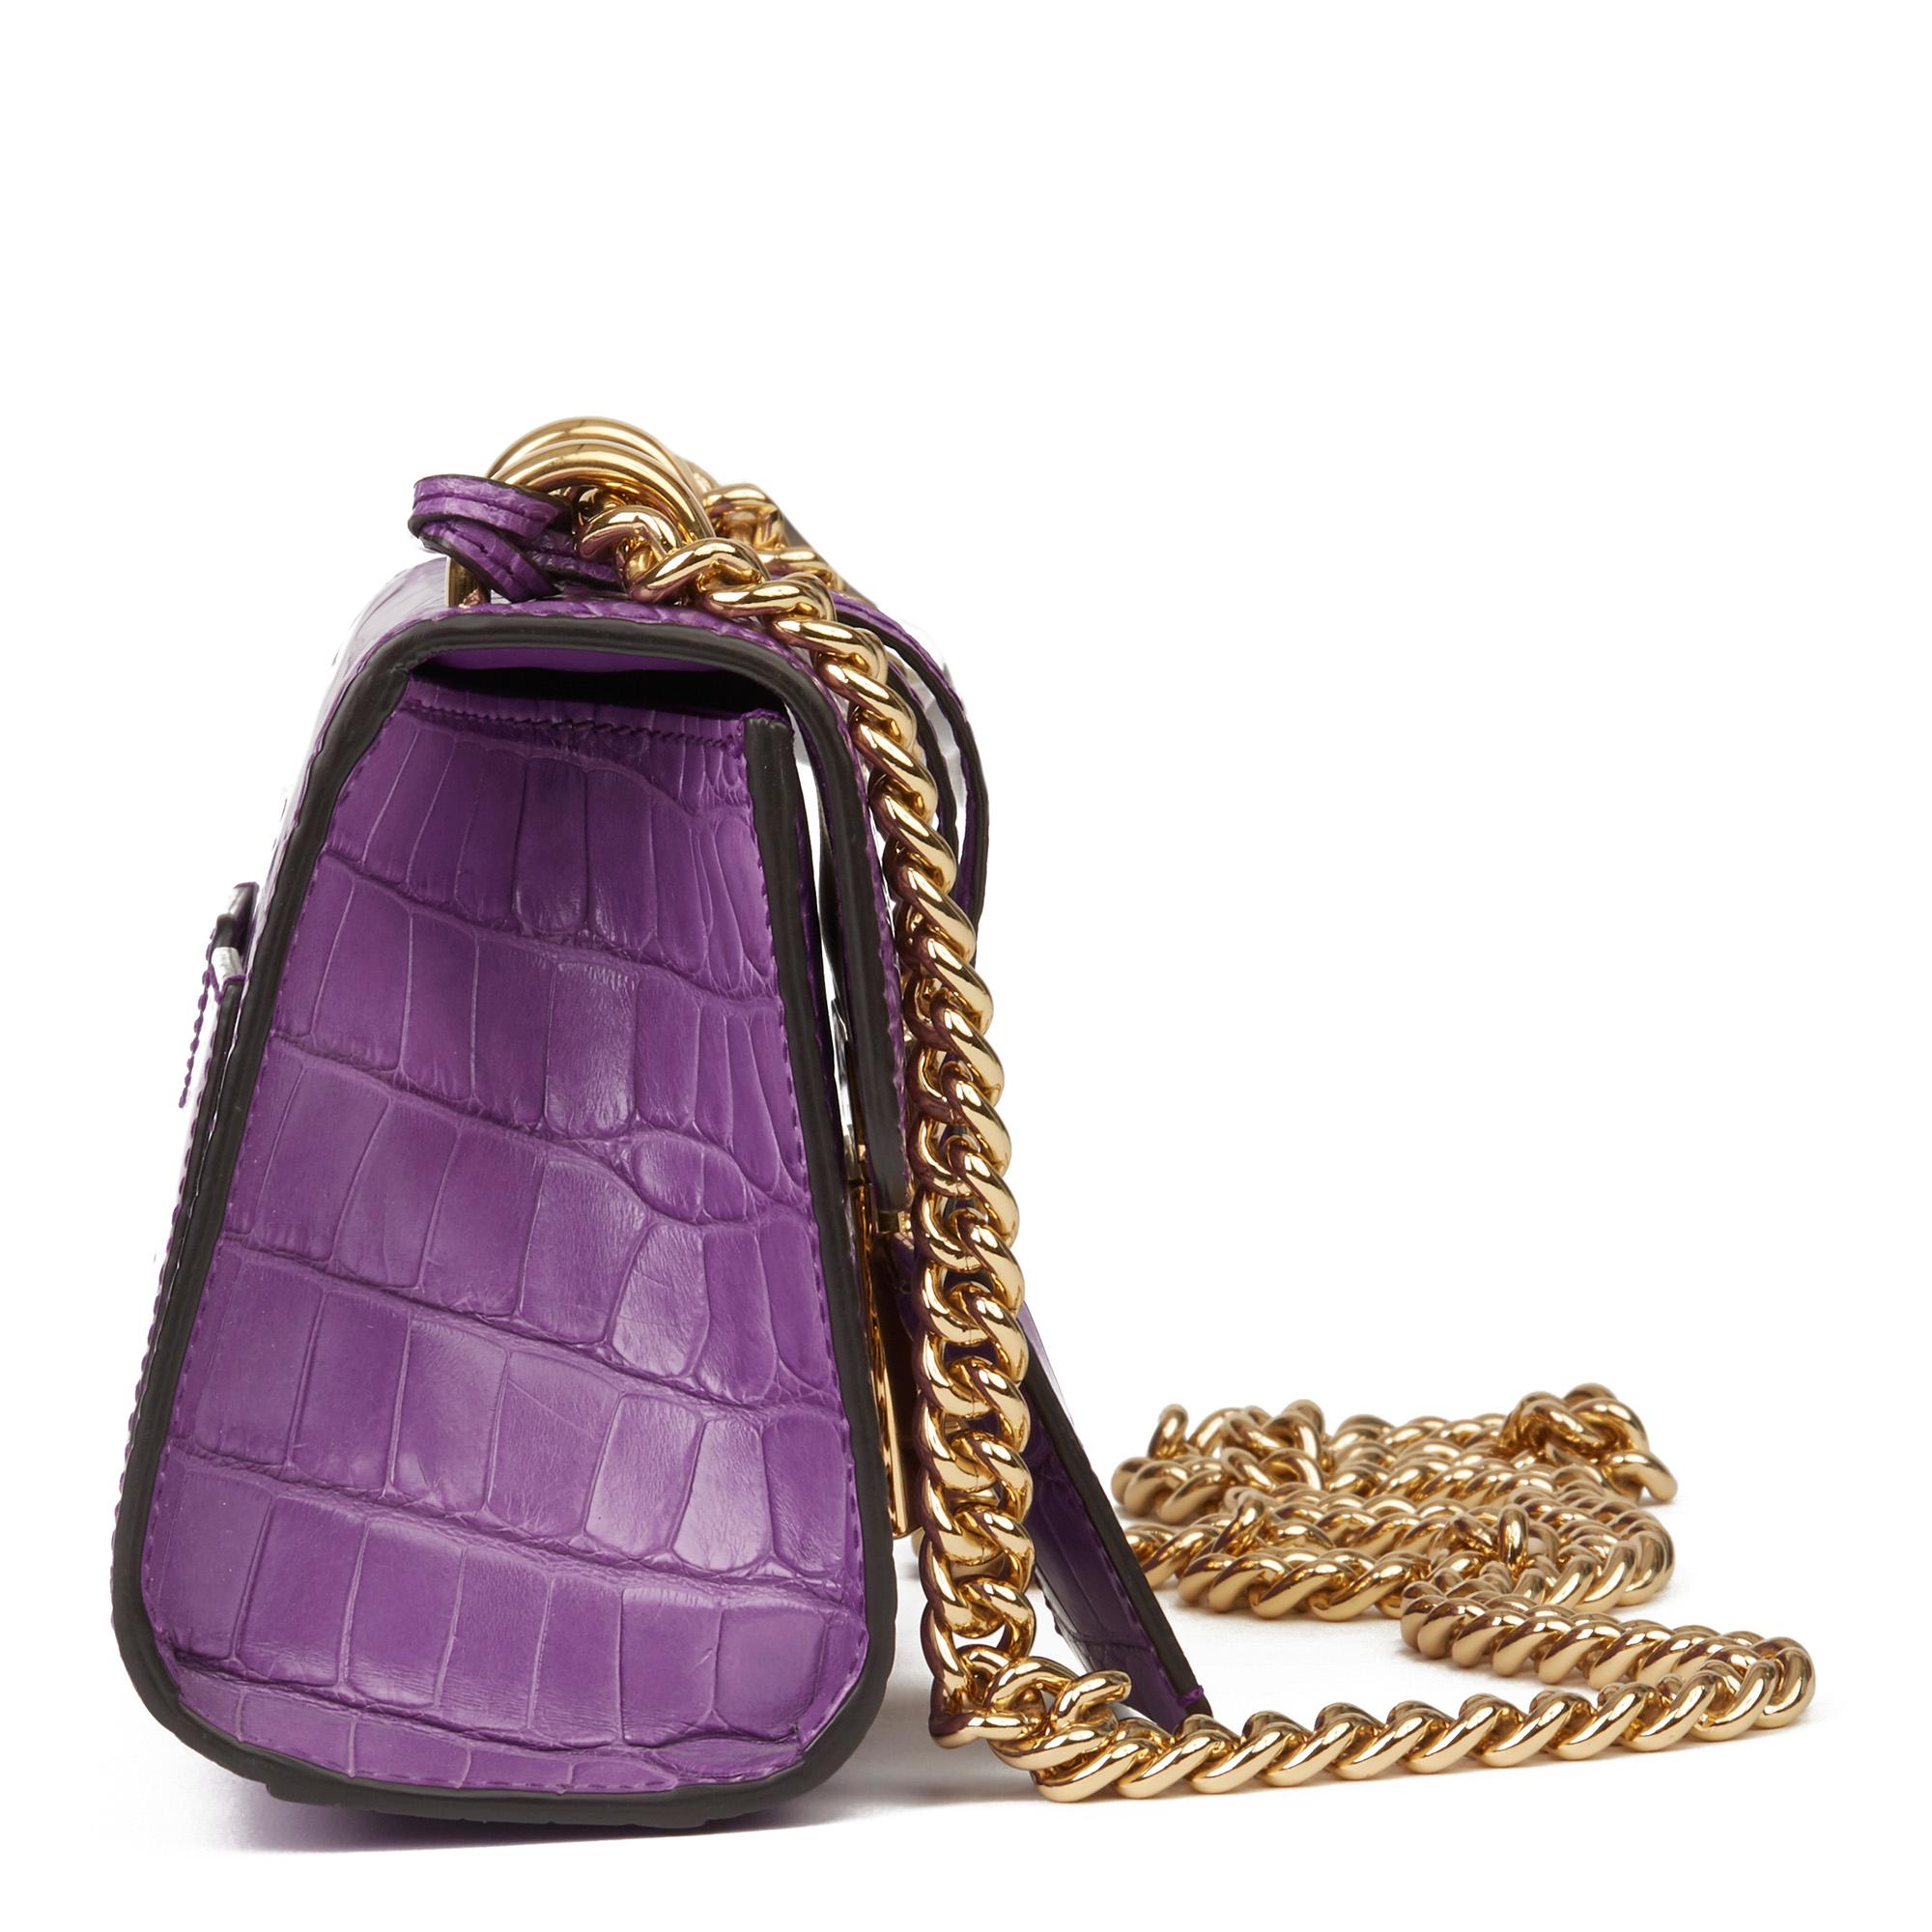 GUCCI
Violet Cyclamen Matte Alligator Leather Small Padlock Shoulder Bag

Serial Number: 409482 525040
Age (Circa): 2020
Accompanied By: Gucci Dust Bag, Box, Care Booklet, Clochette, Keys
Authenticity Details: Serial Stamp (Made in Italy)
Gender: